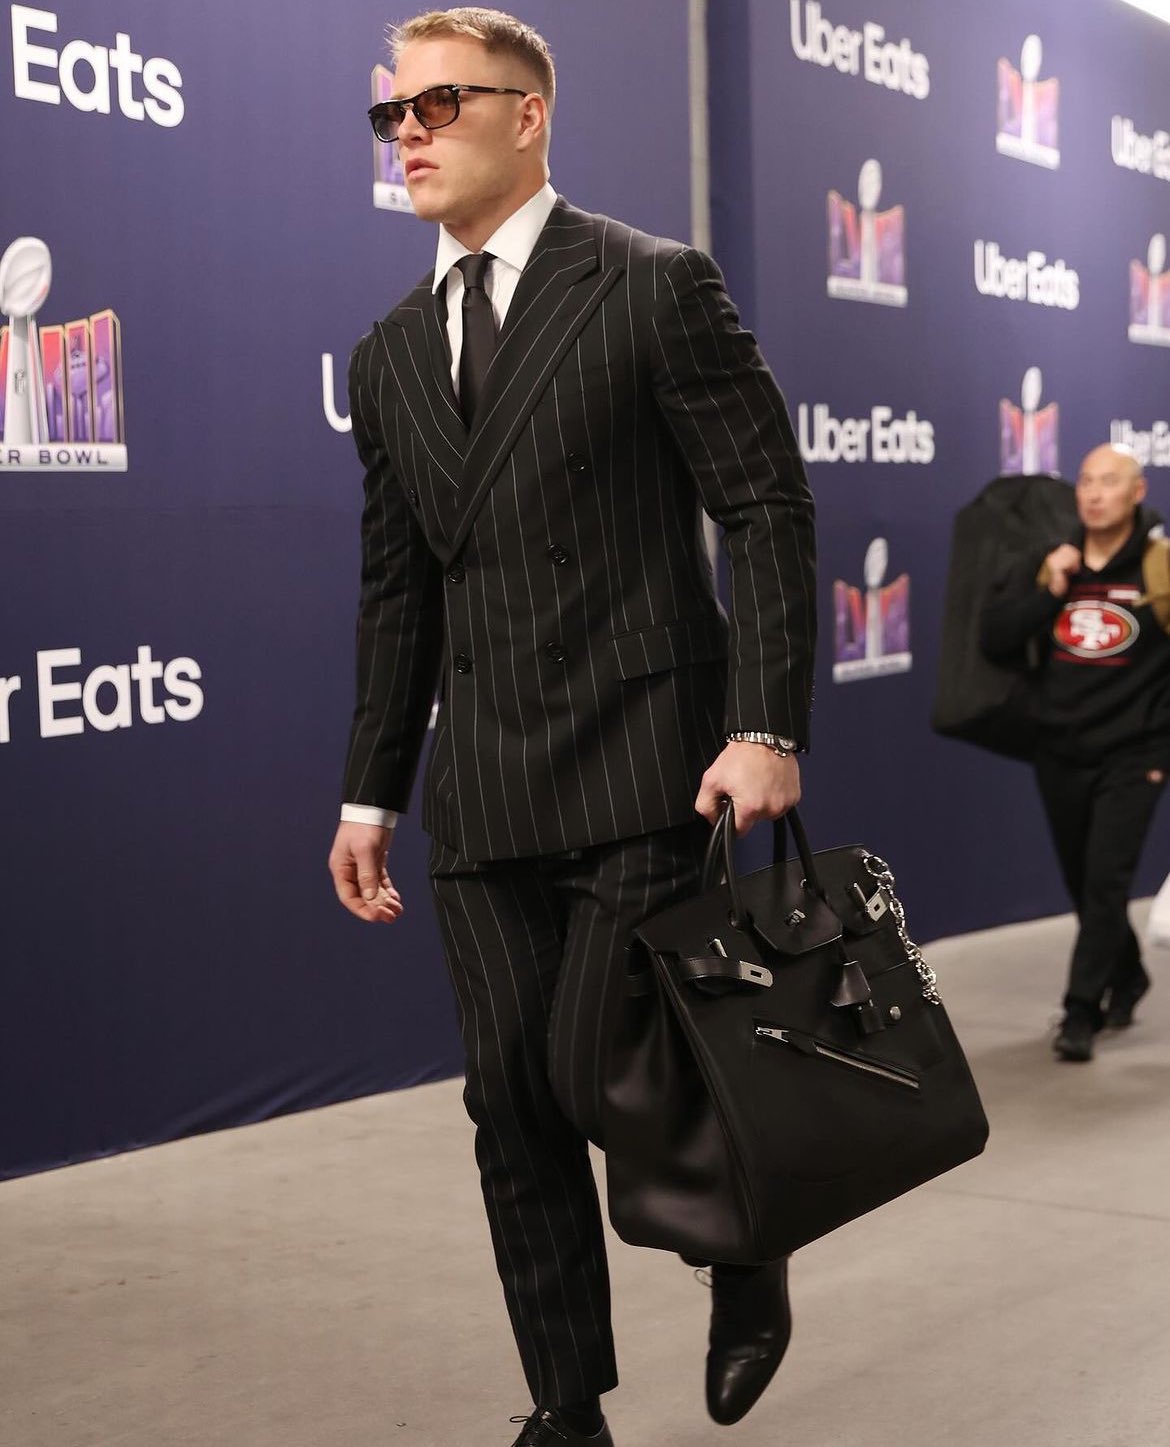 What Bag Did Christian McCaffrey Carry to the Super Bowl?